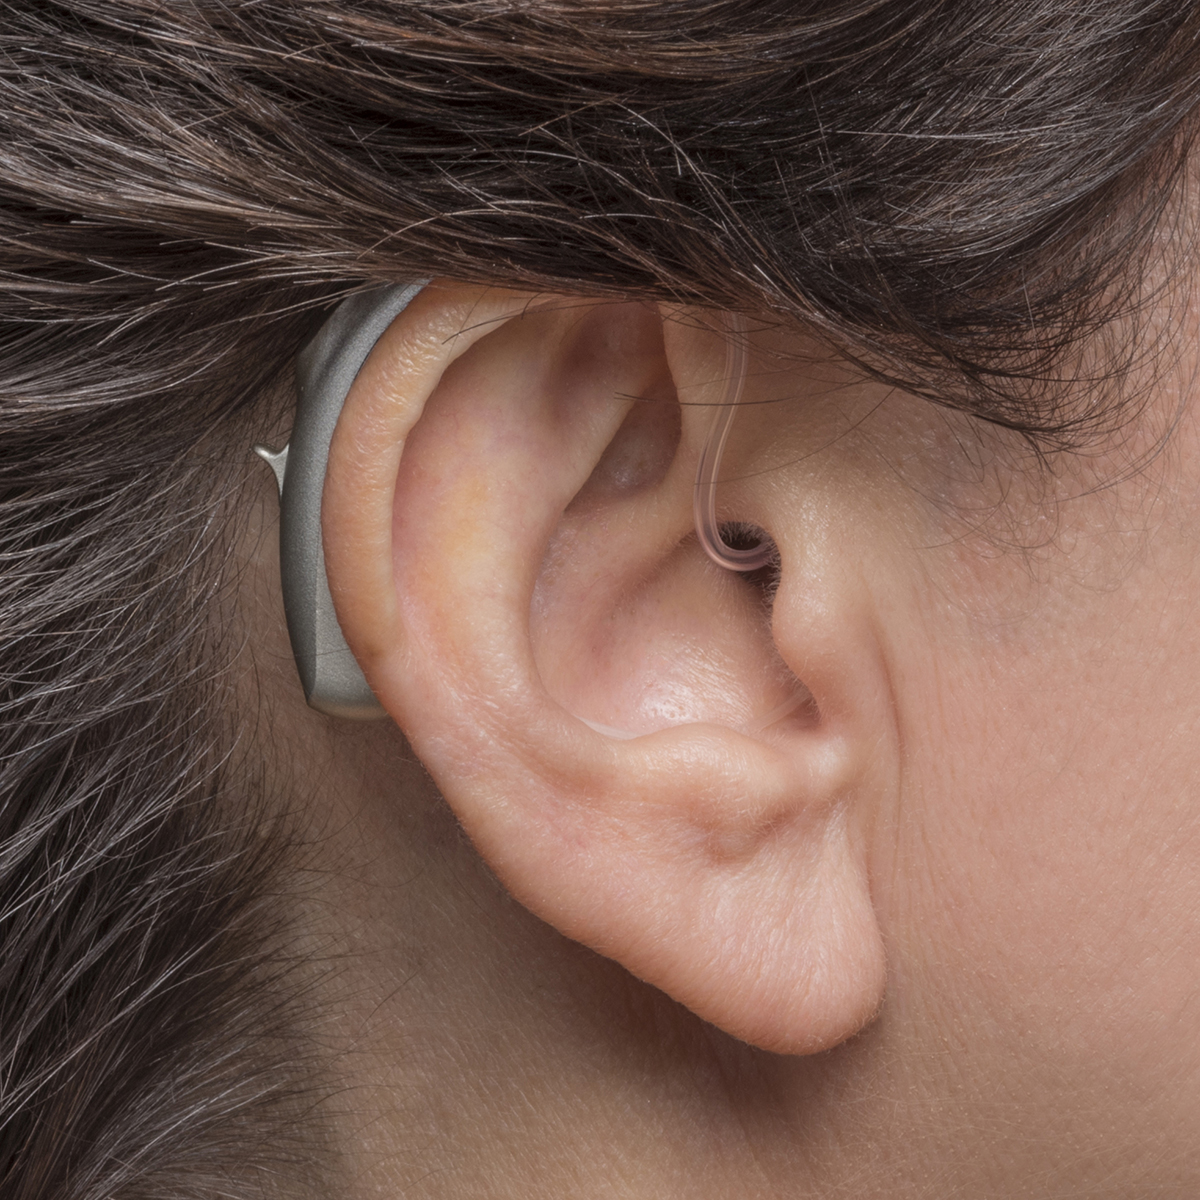 Behind the Ear Hearing Aids The Villages Lady Lake Fruitland Park